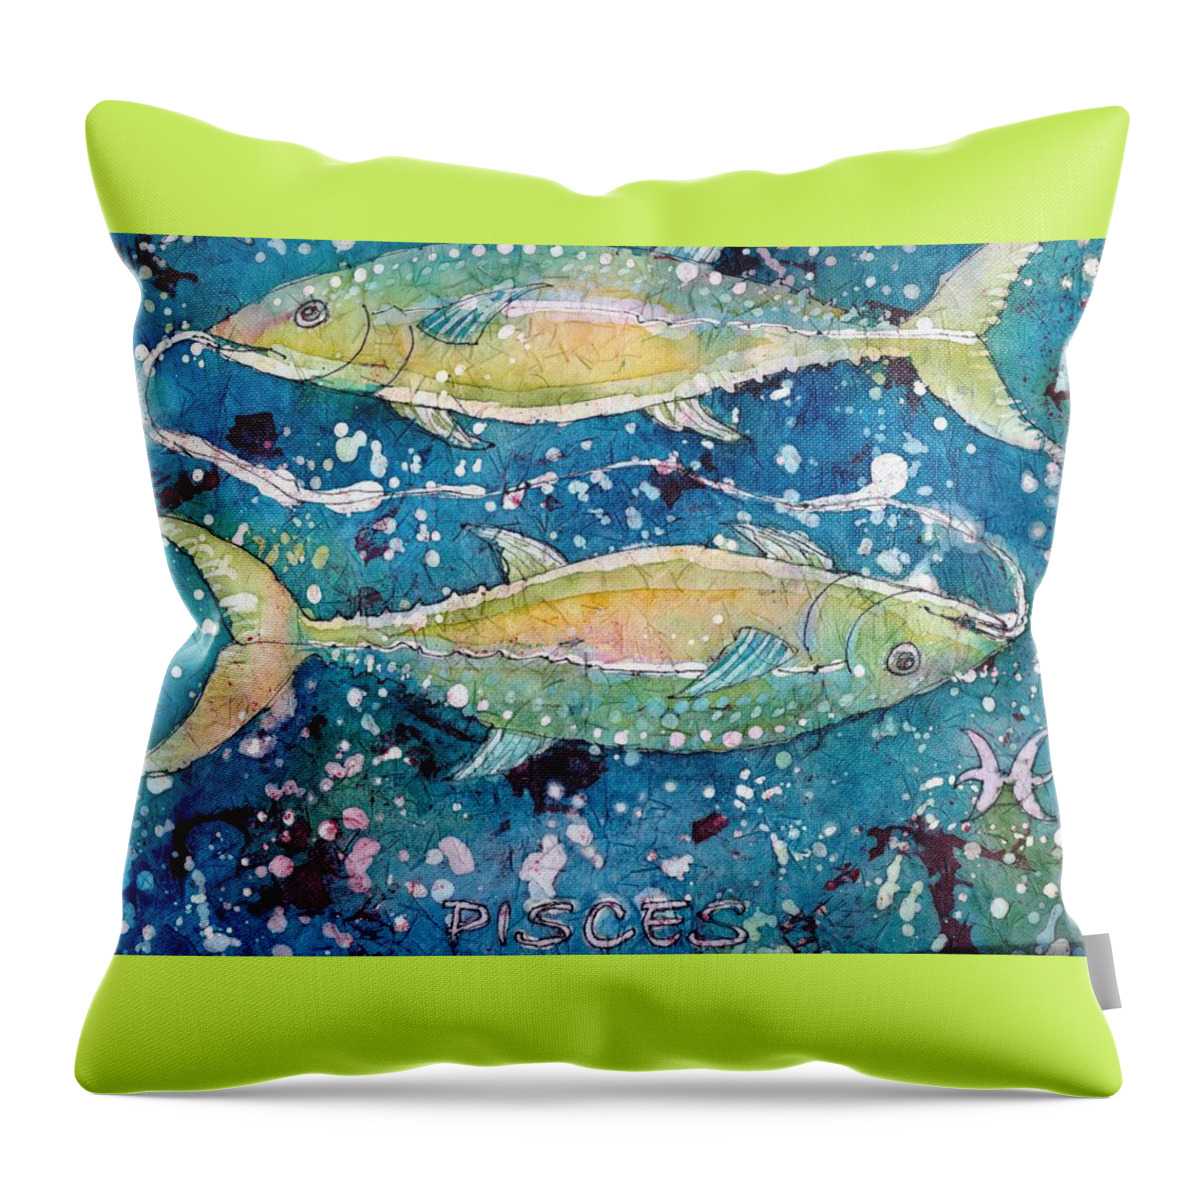 Zodiac Throw Pillow featuring the painting Pisces by Ruth Kamenev